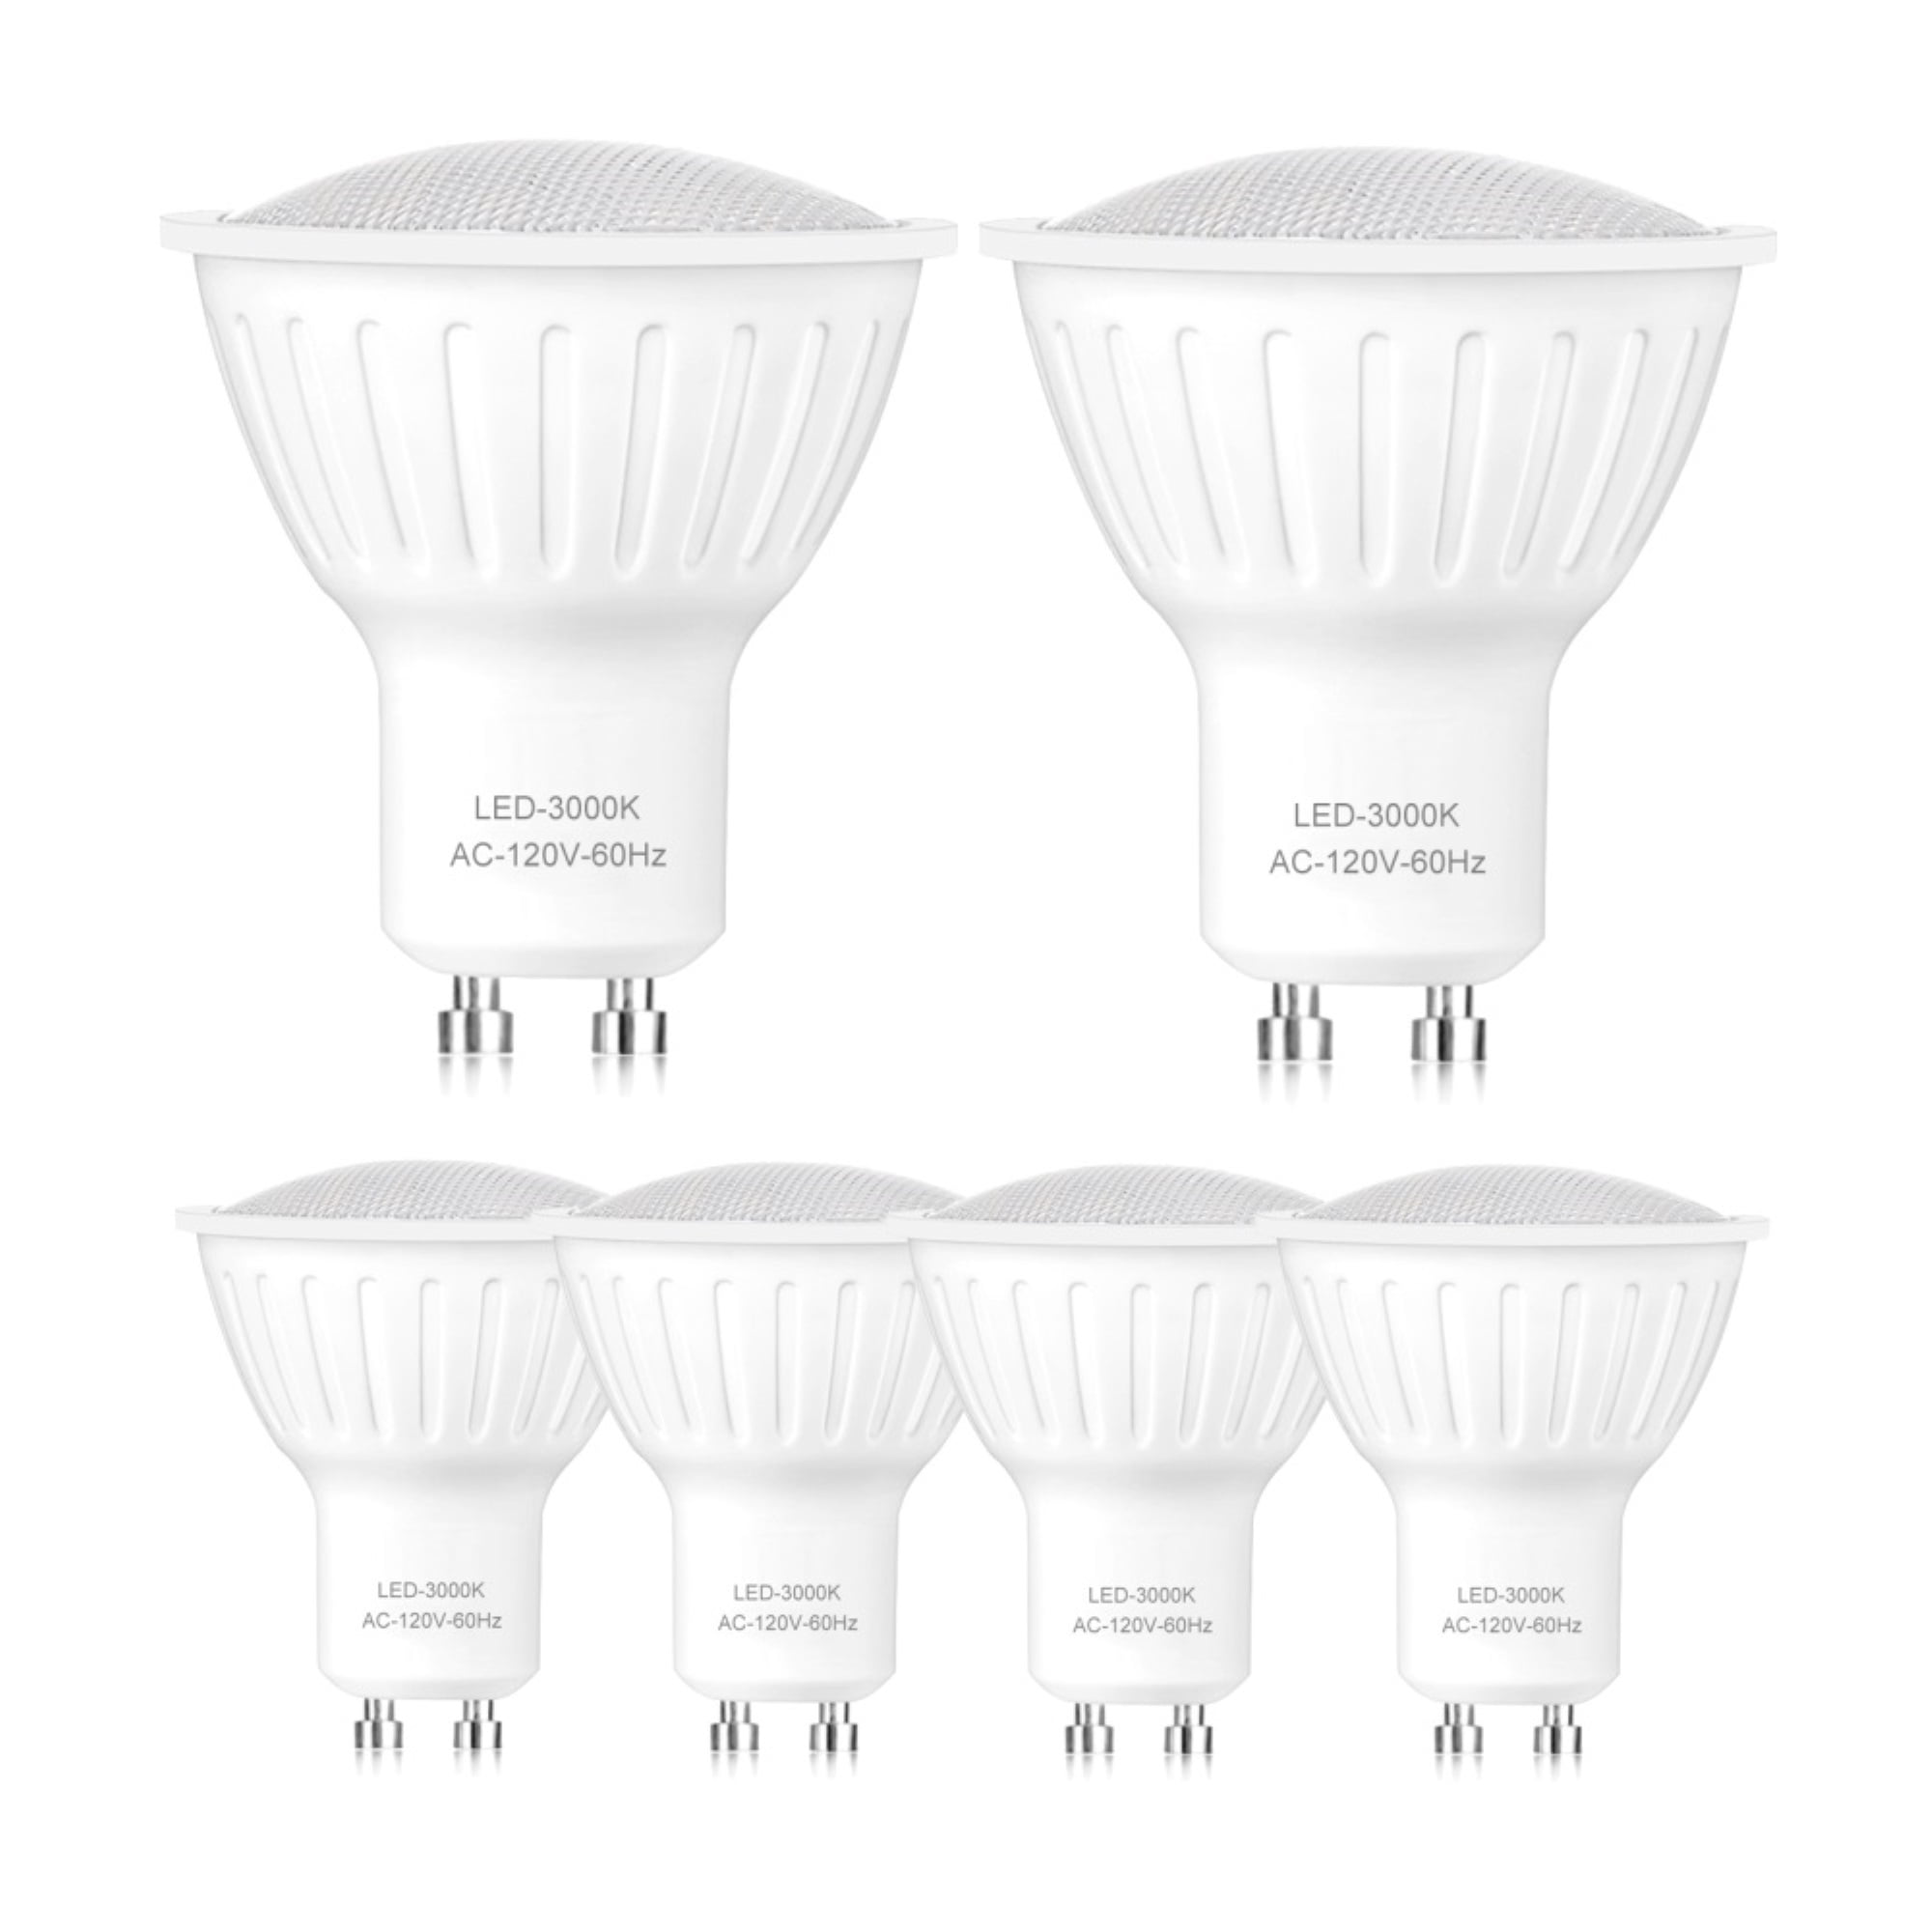 Looking to Brighten Things Up With GU10 Bulbs. Try These 10 Tips